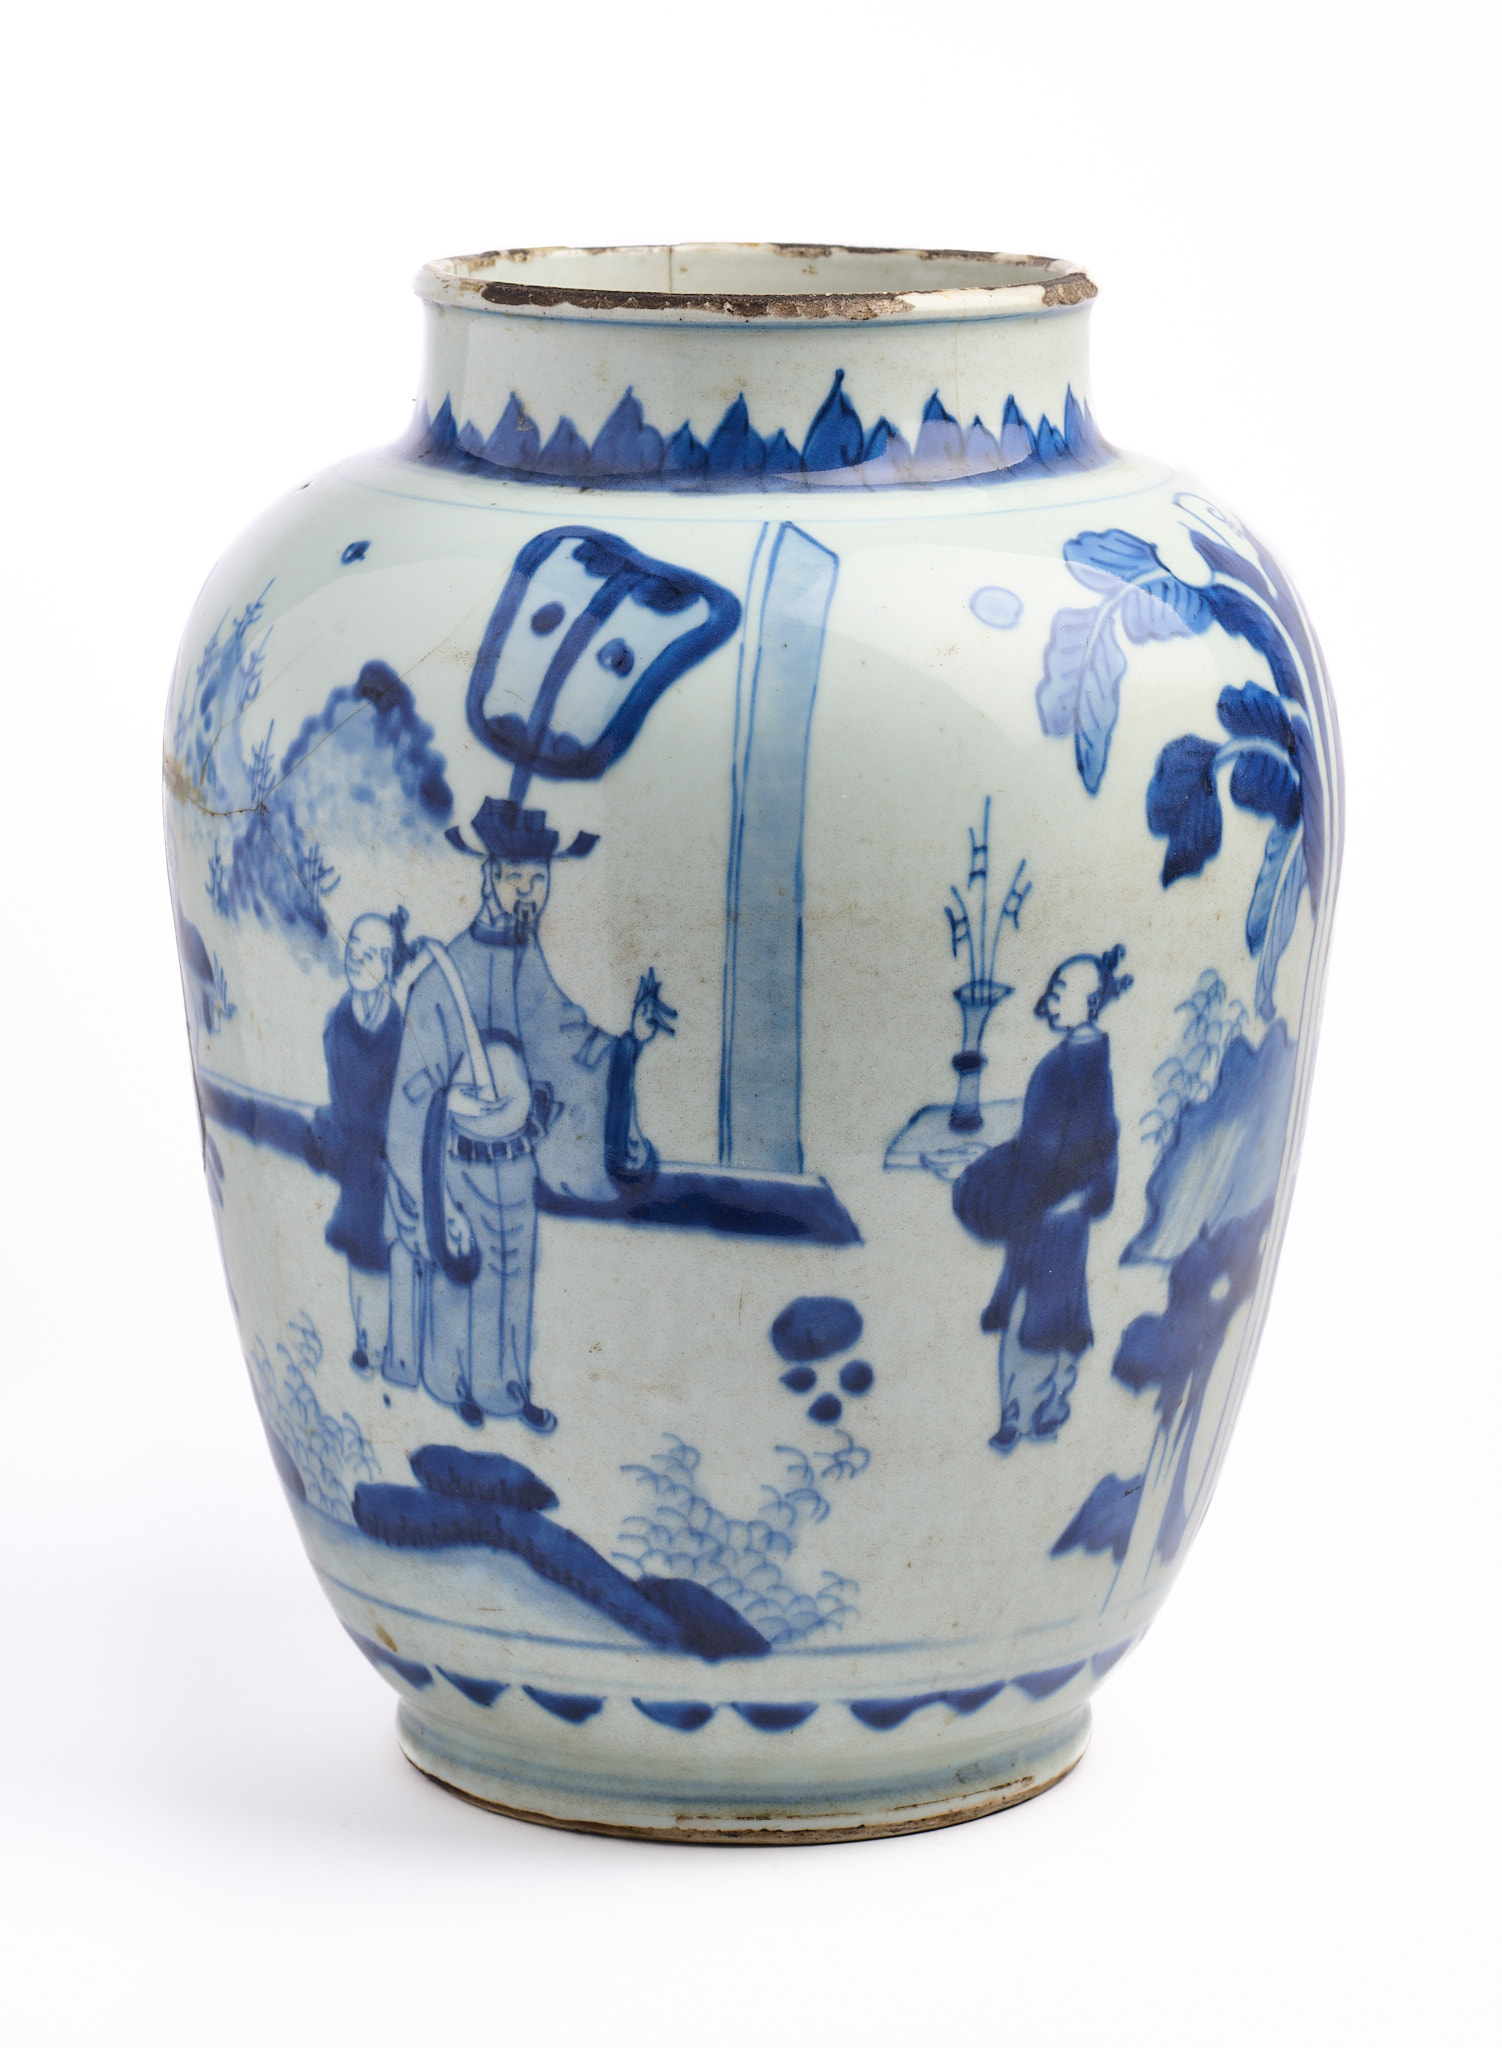 A CHINESE BLUE AND WHITE JAR, TRANSITIONAL PERIOD (CIRCA 1640)